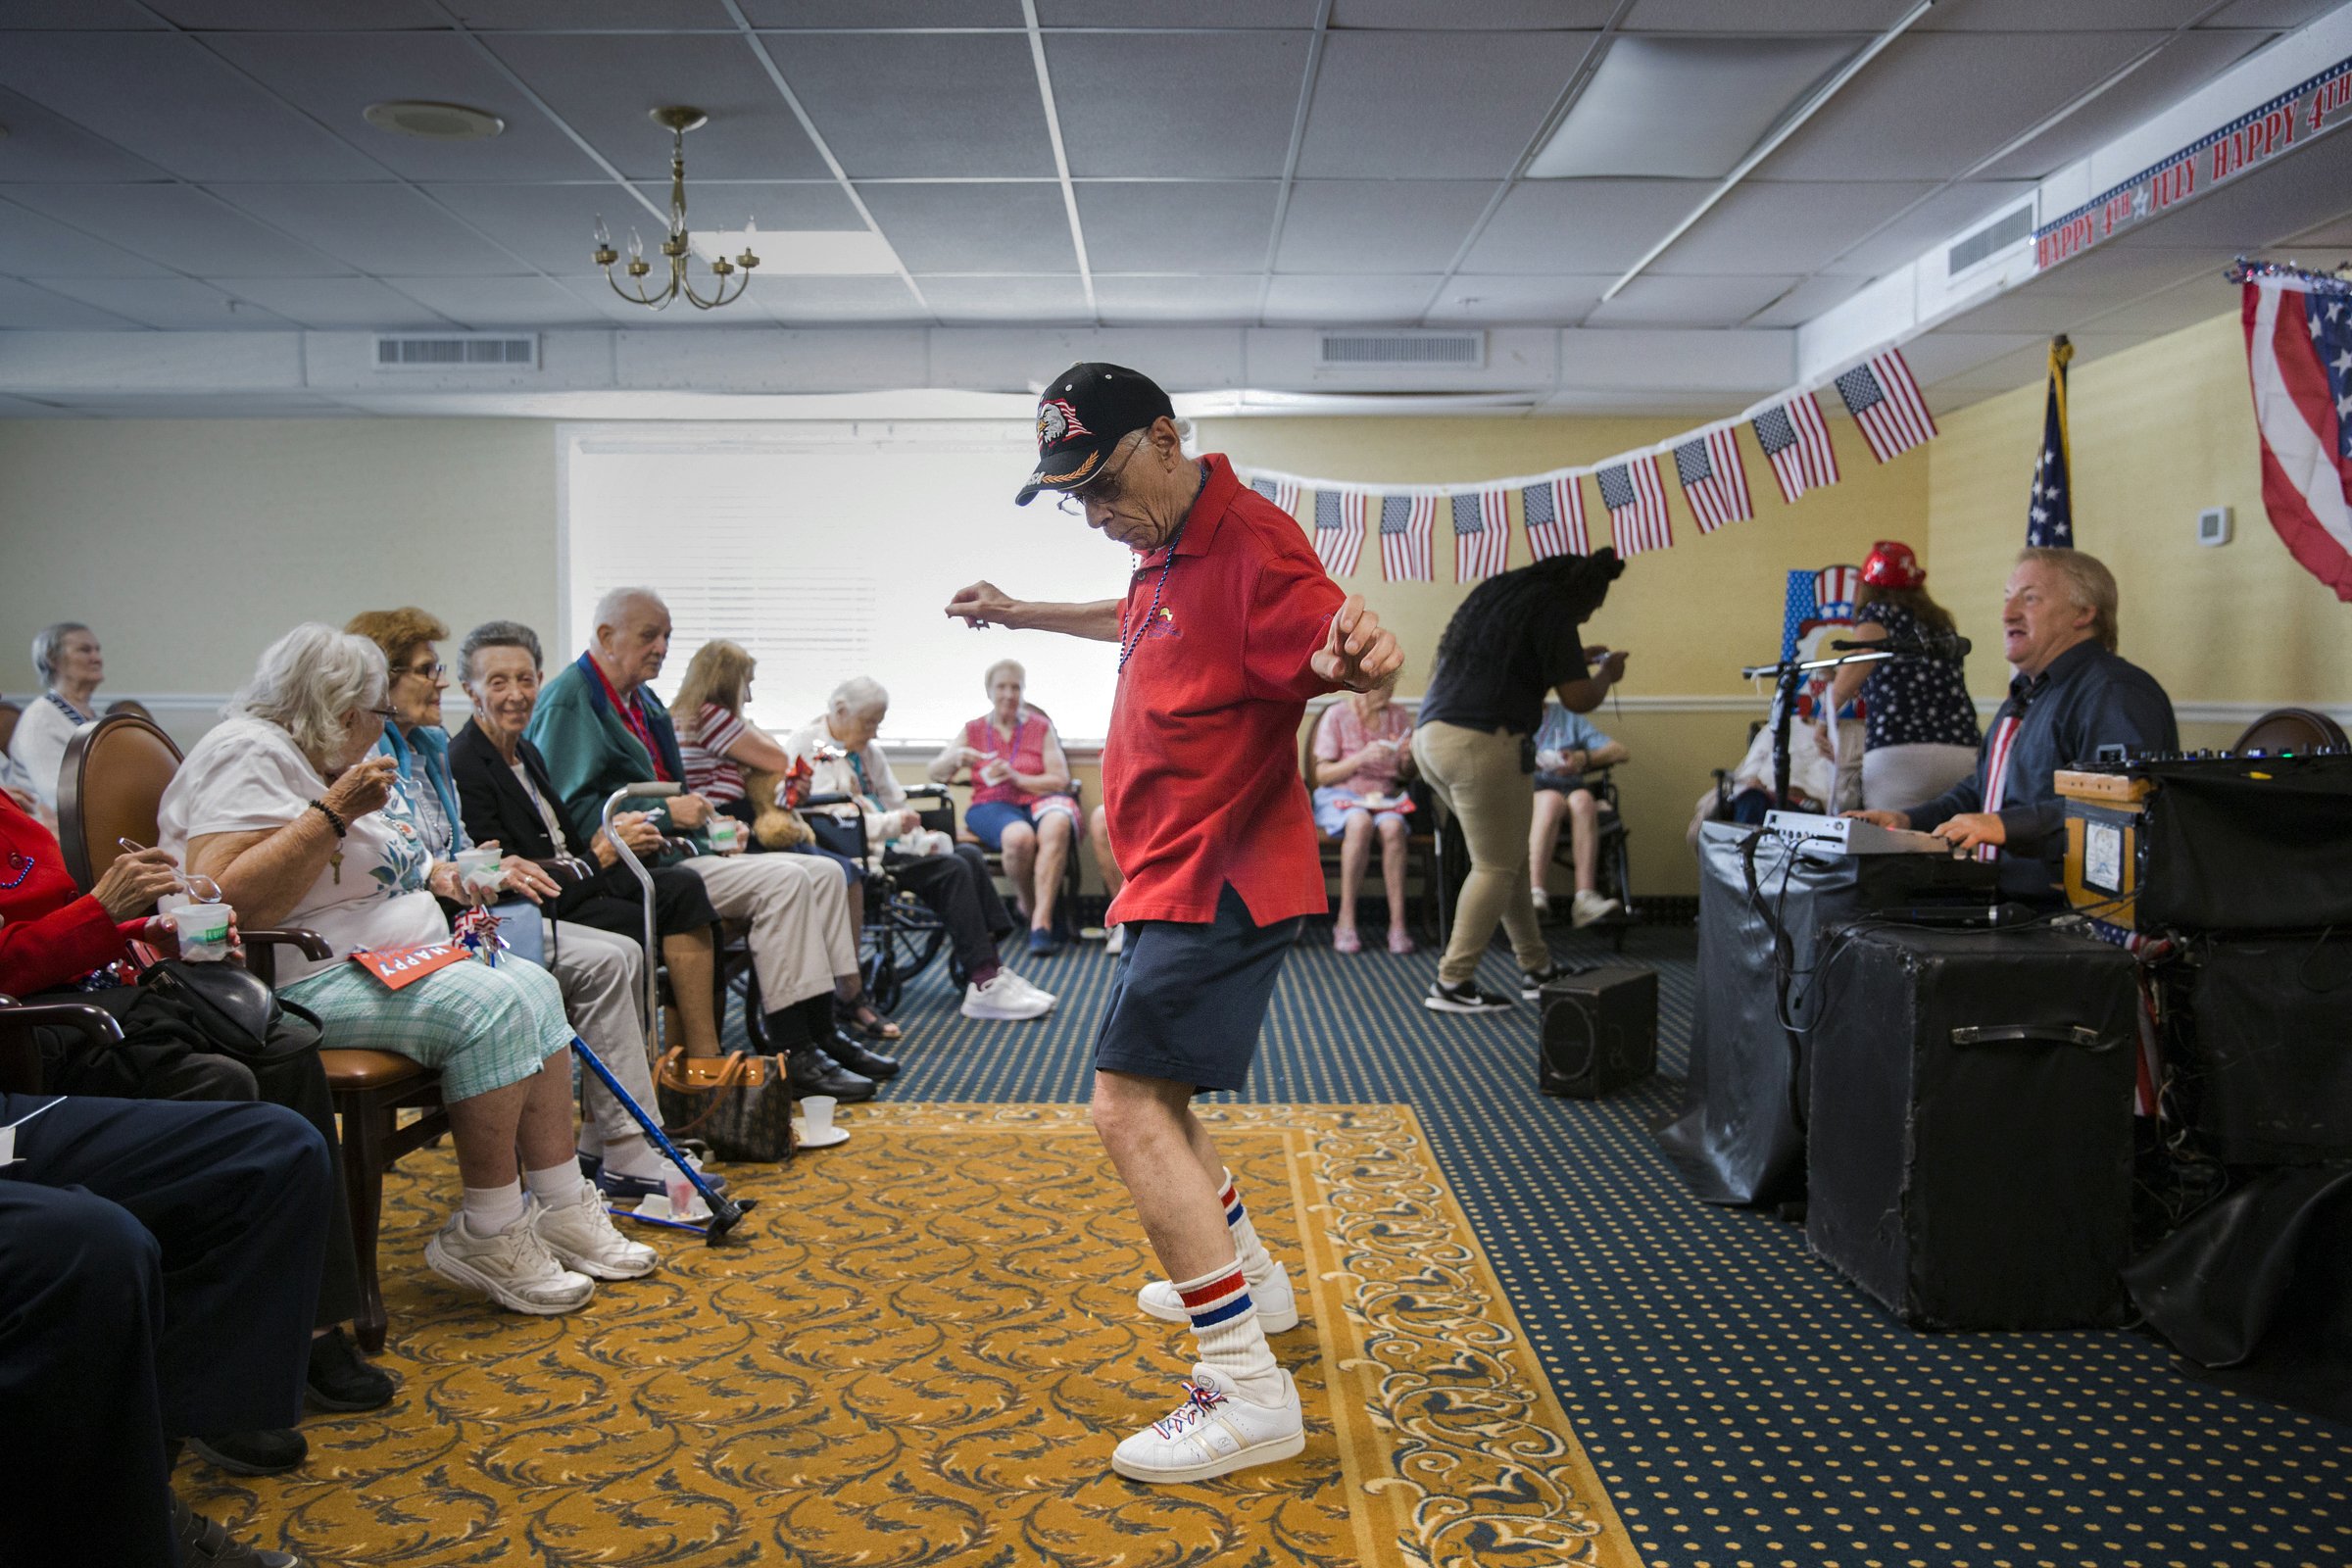   Jim “Mr. Twist” does the twist at Brandywine’s 4th of July party on July 4, 2019. At this time, he was volunteering at Brandywine. This past spring, he moved in as a resident. 